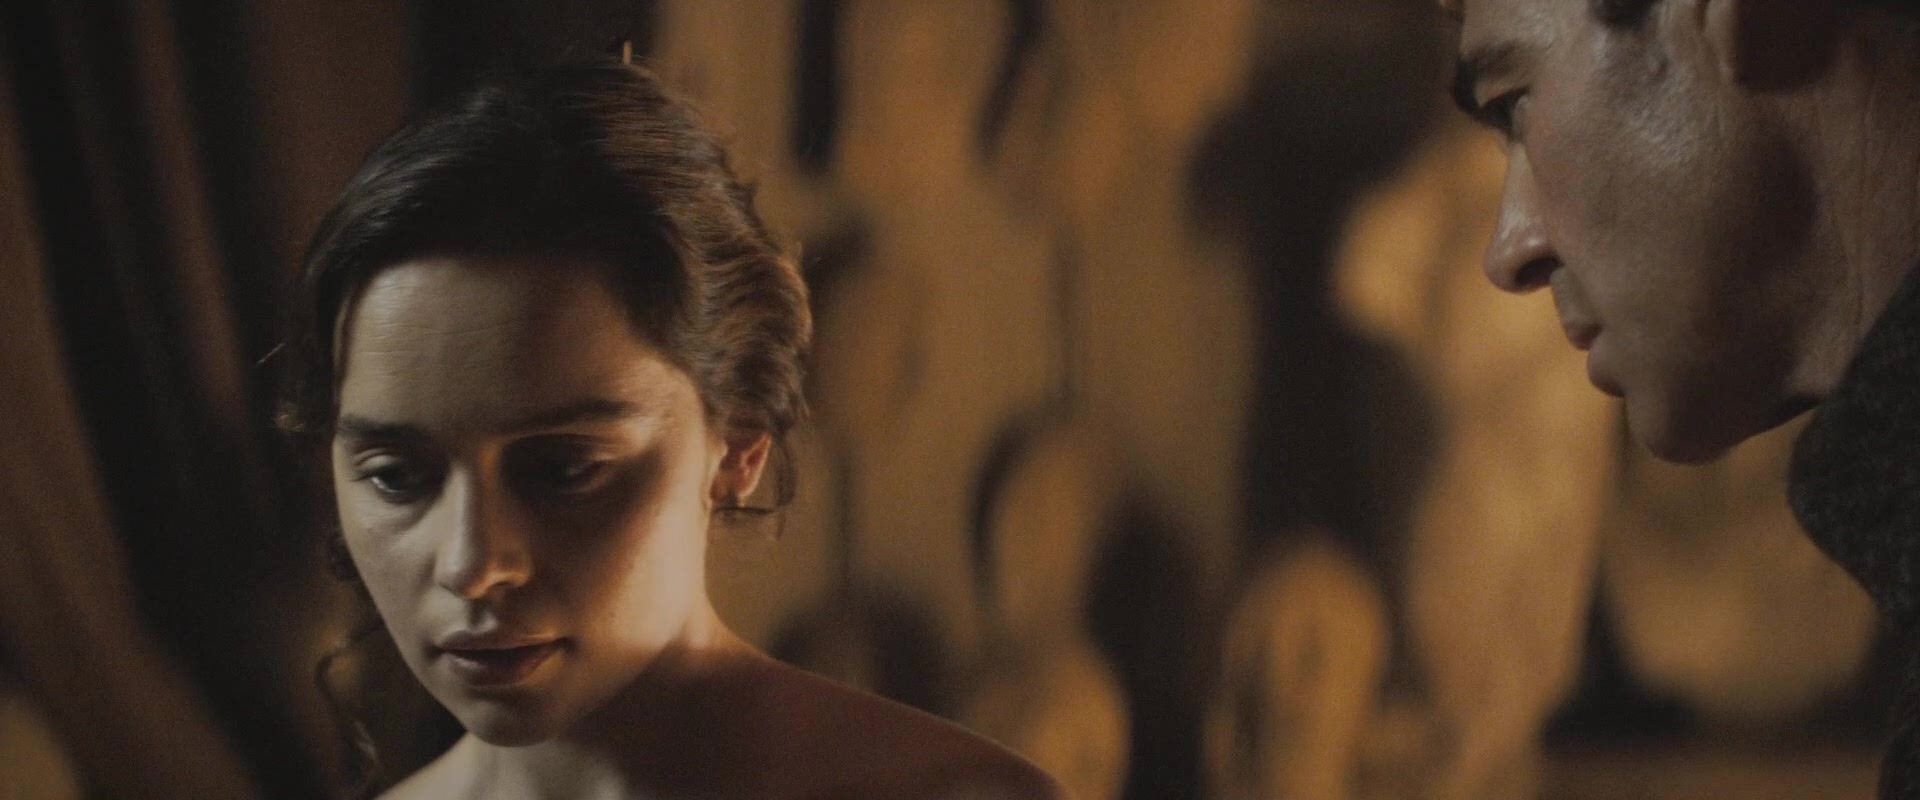 Brother Sister Emilia Clarke nude - Voice from the Stone (2017) Raw - 1